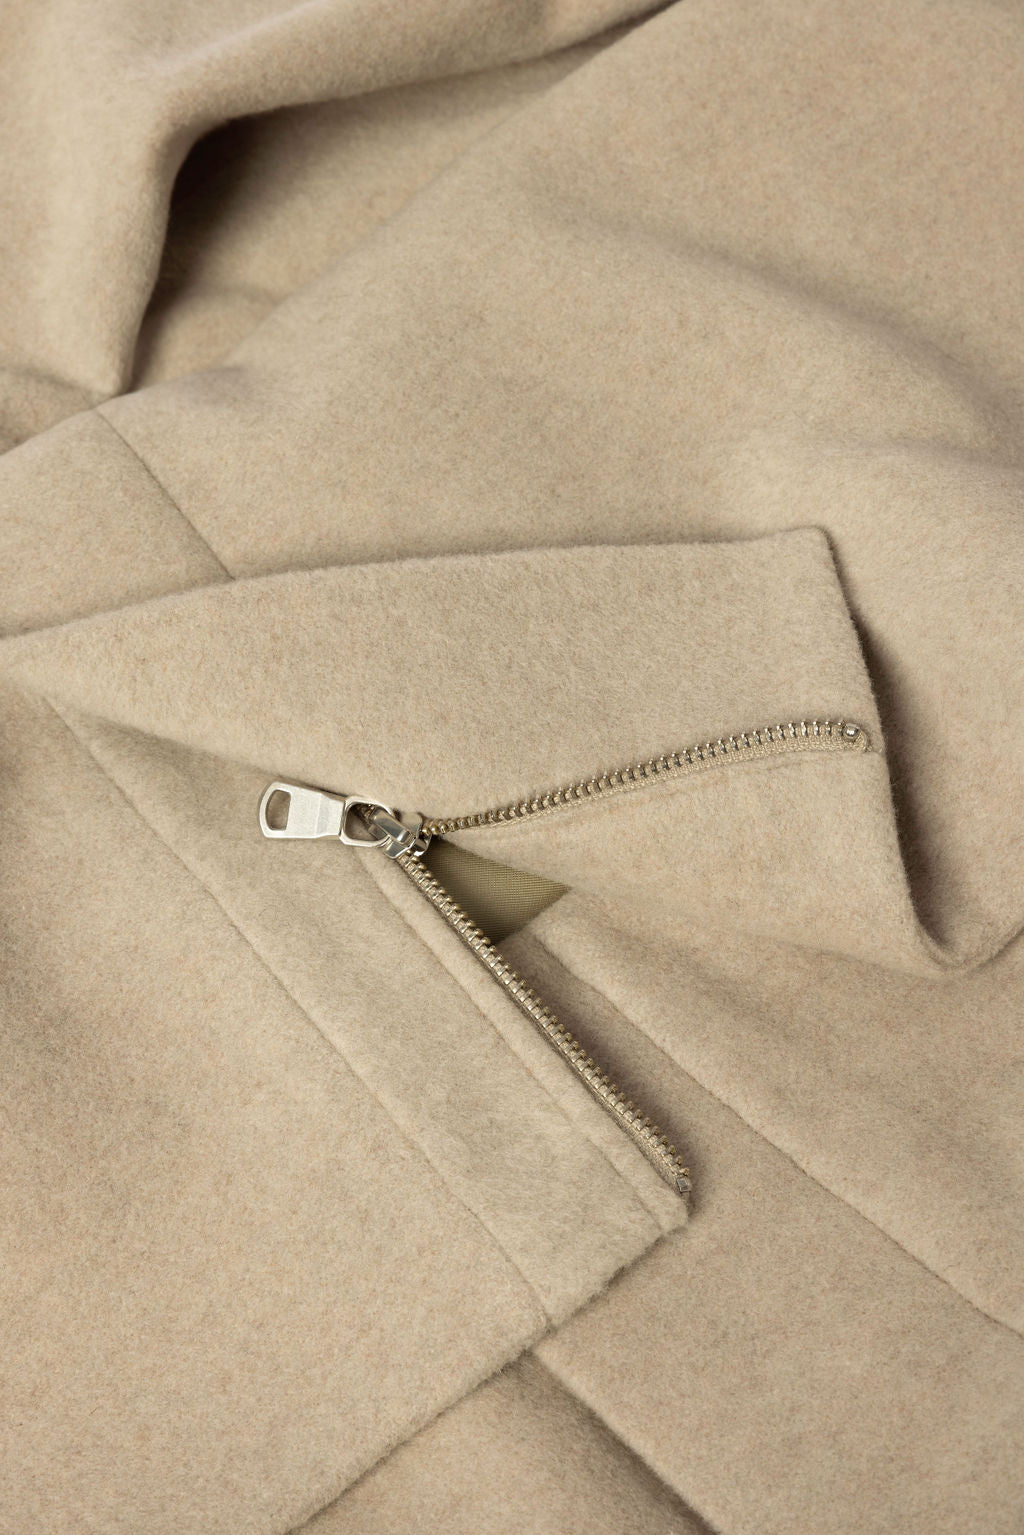 Minimalist Capsule Wardrobe Full Length Turns to Cropped Trench Coat in Tan Zipper Details